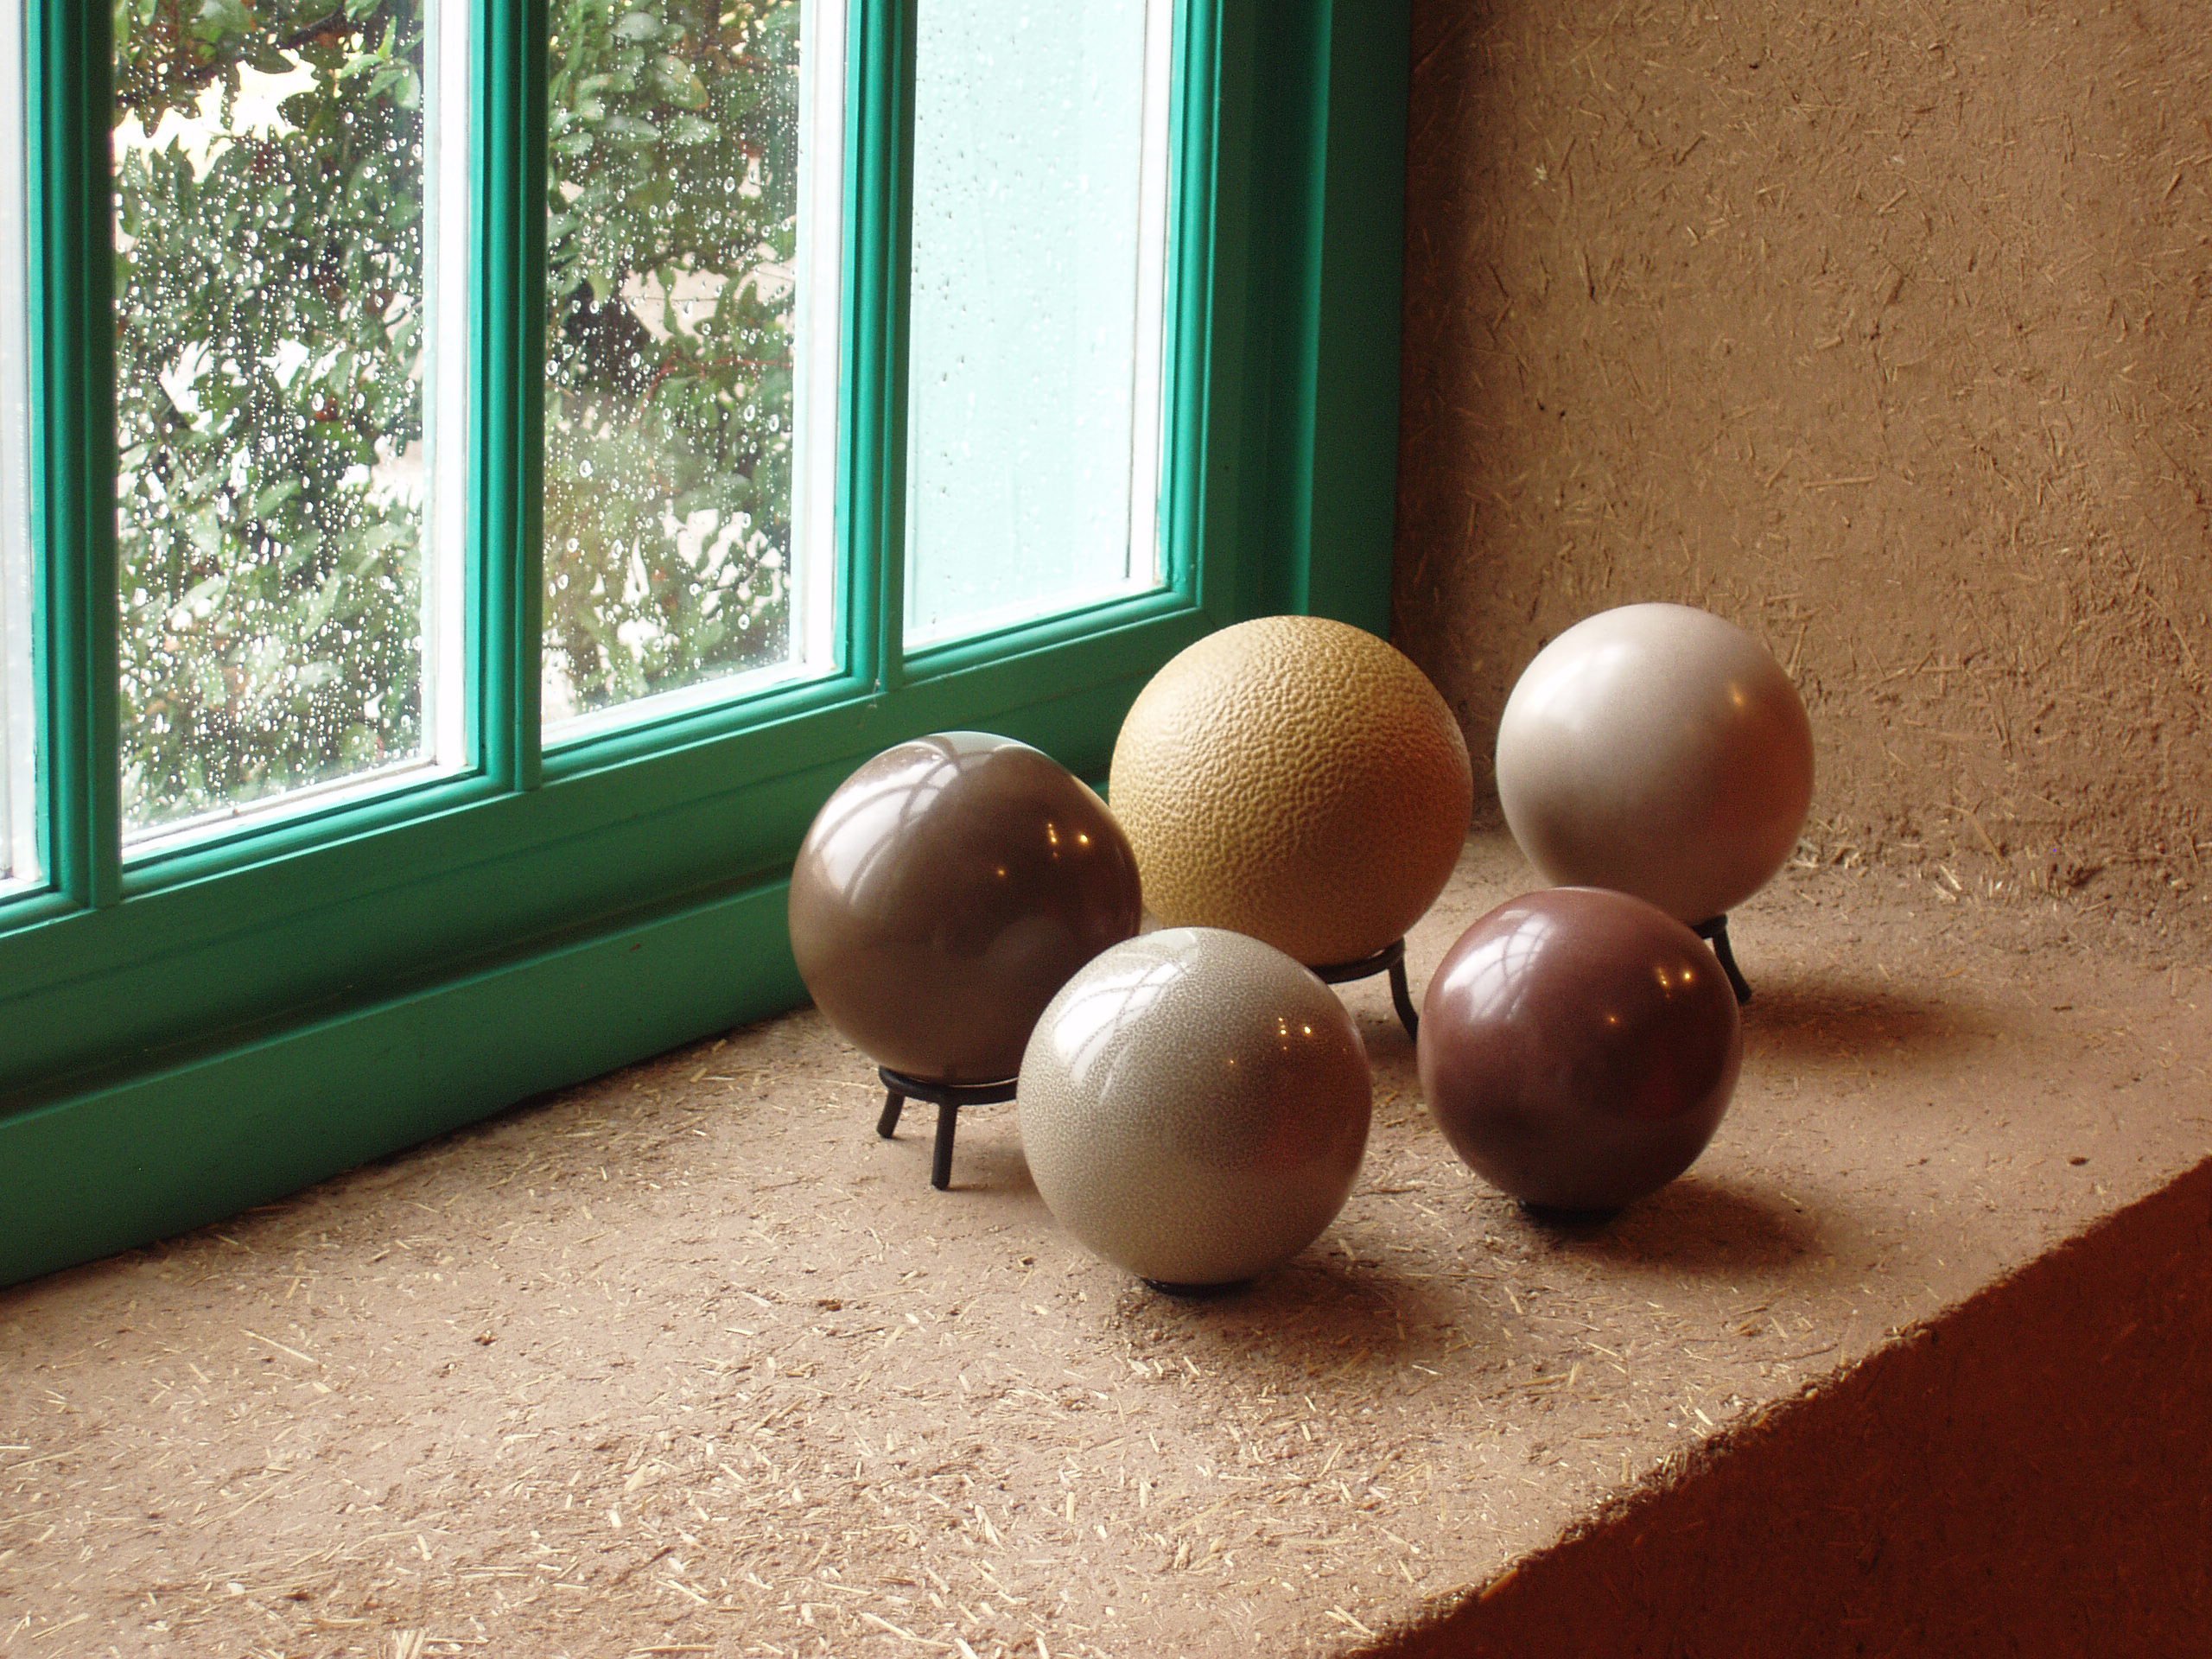 Porcelain spheres in different shades of brown on window sill.